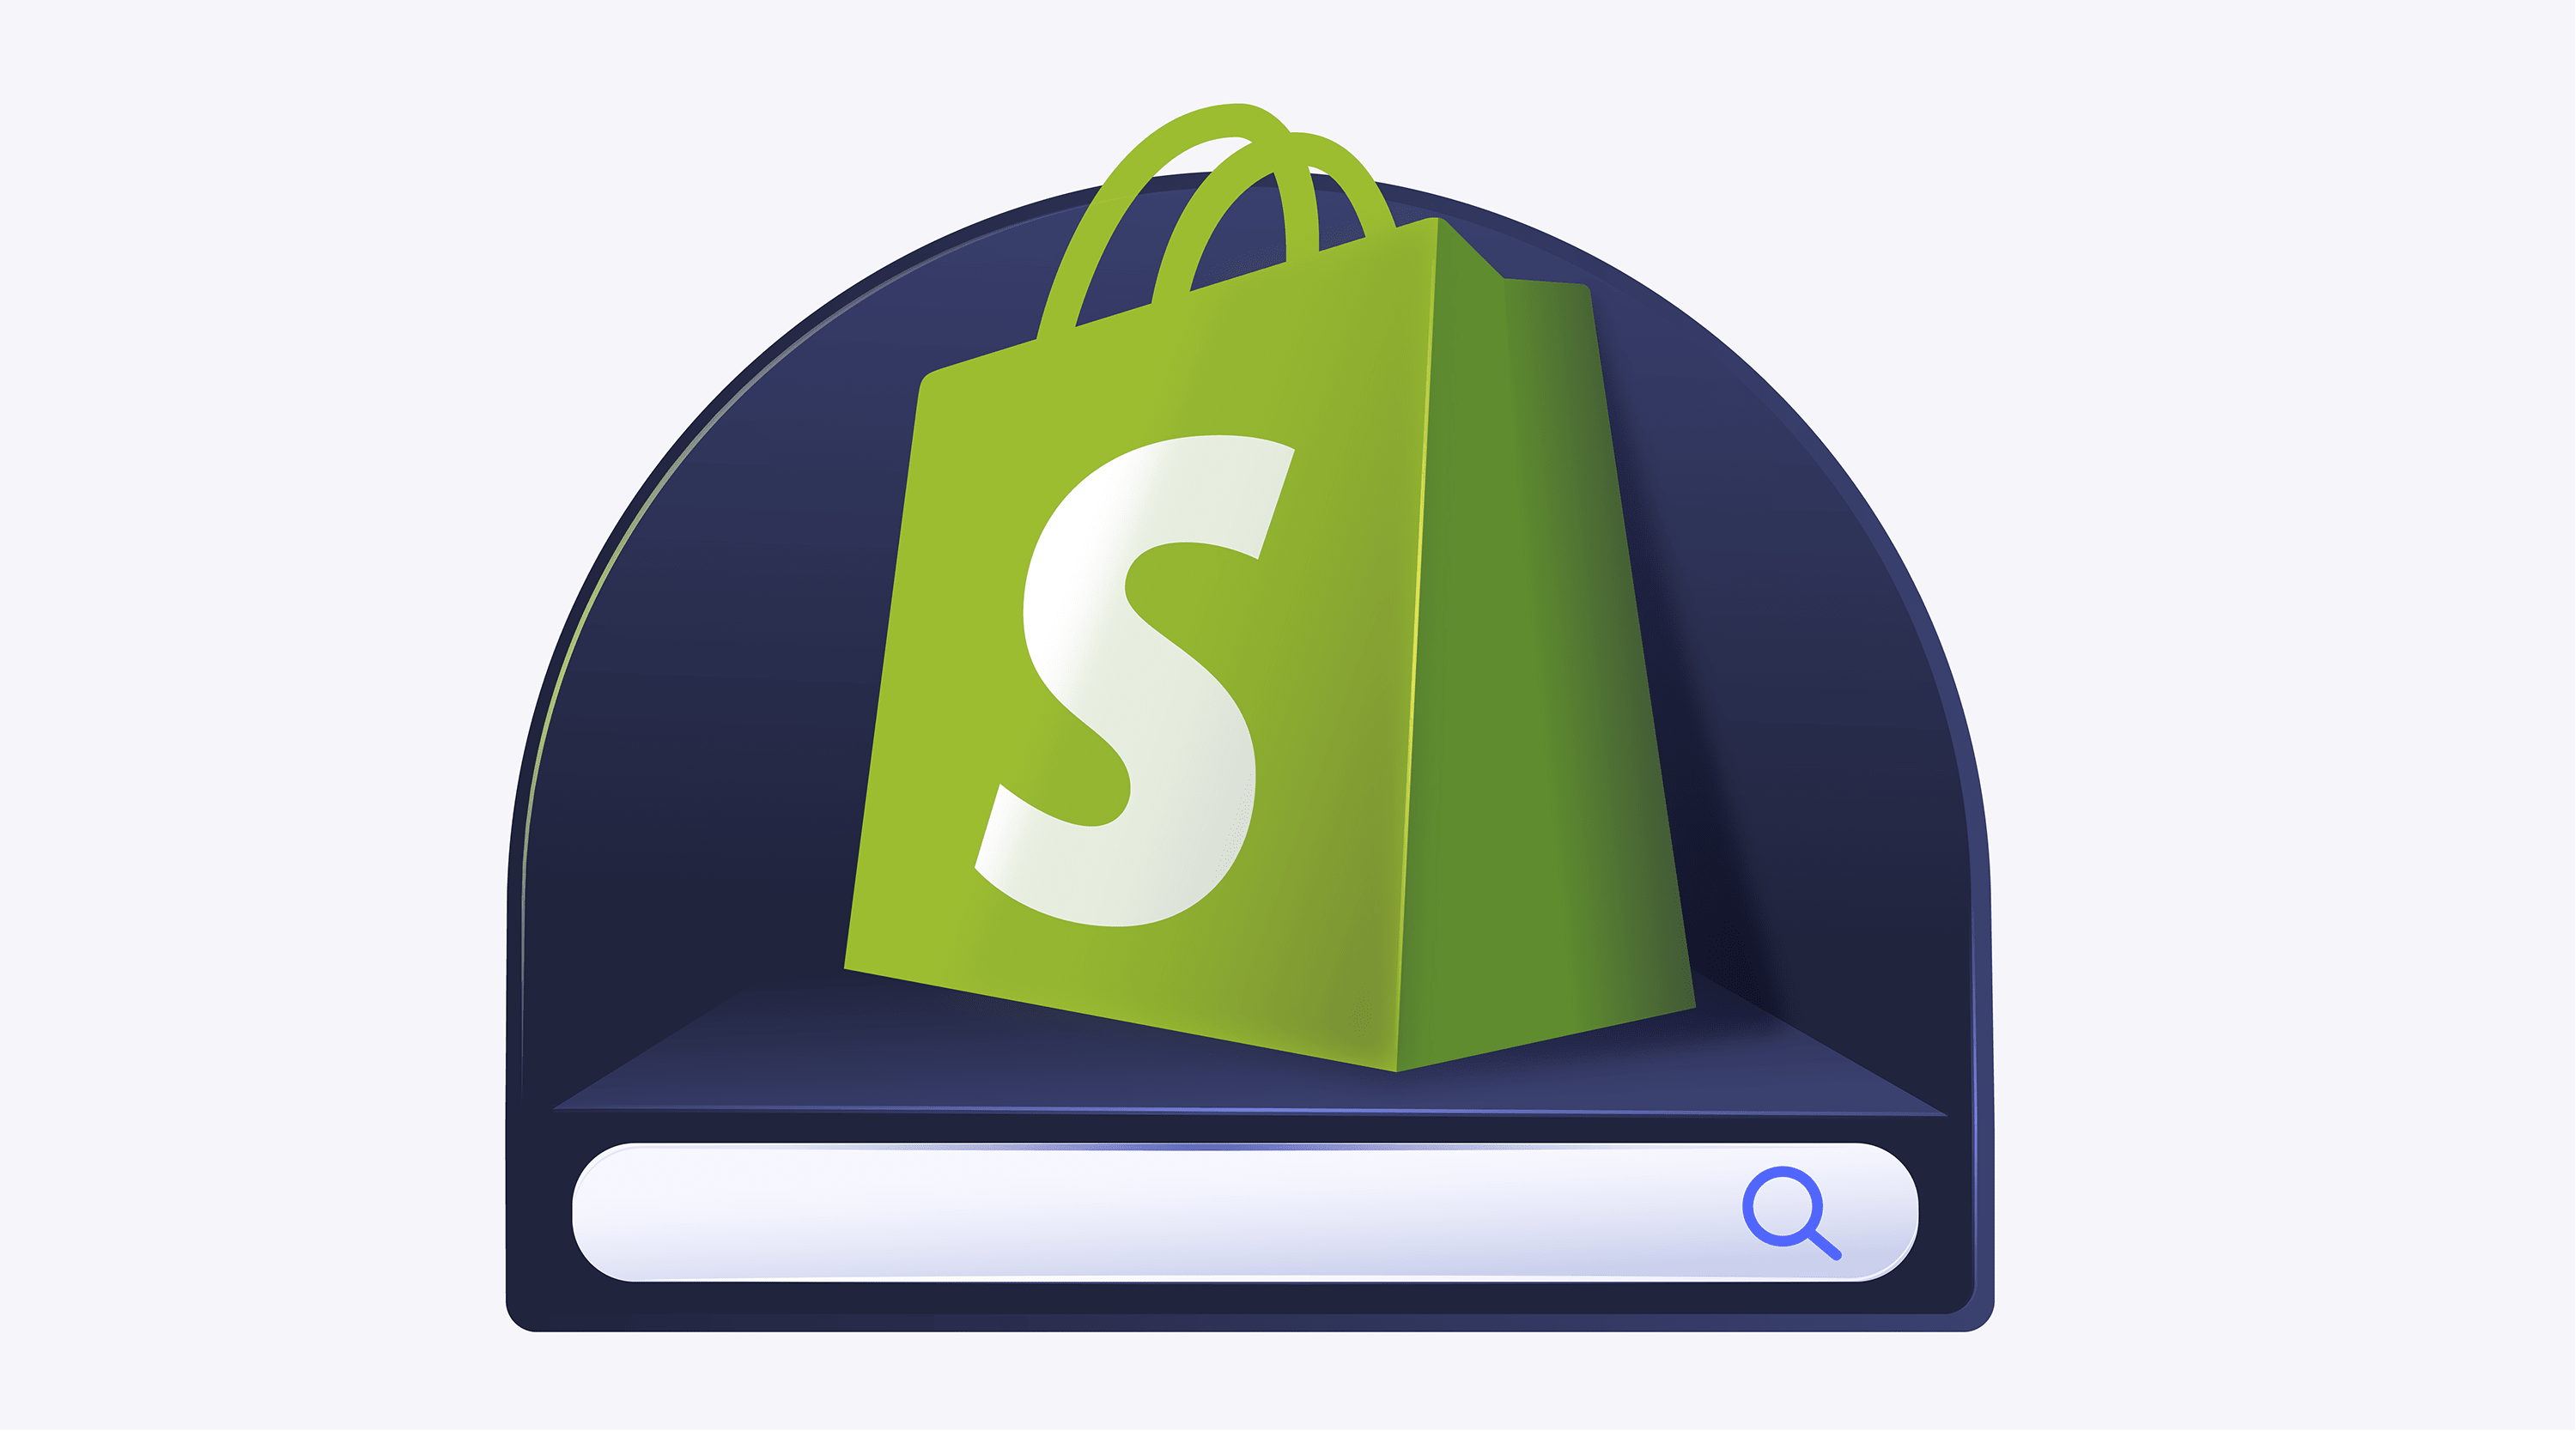 What’s the secret to improving your Shopify conversion? Great search